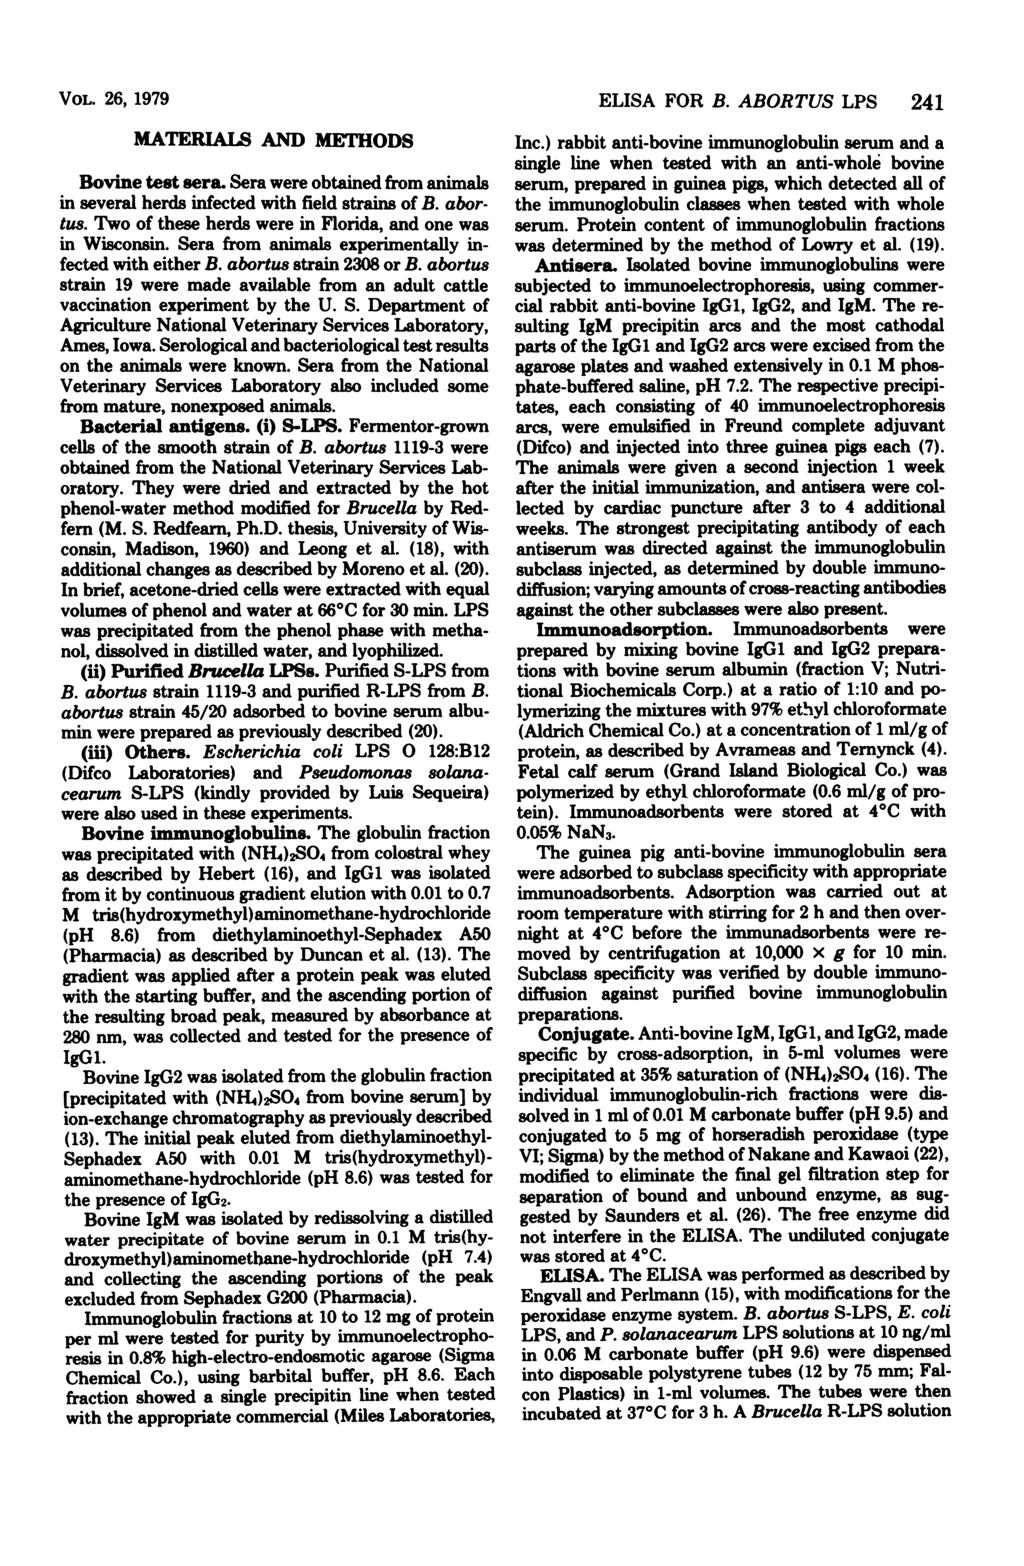 VOL. 26, 1979 MATERIALS AND METHODS Bovine test sera. Sera were obtained from animals in several herds infected with field strains of B. abortuw.